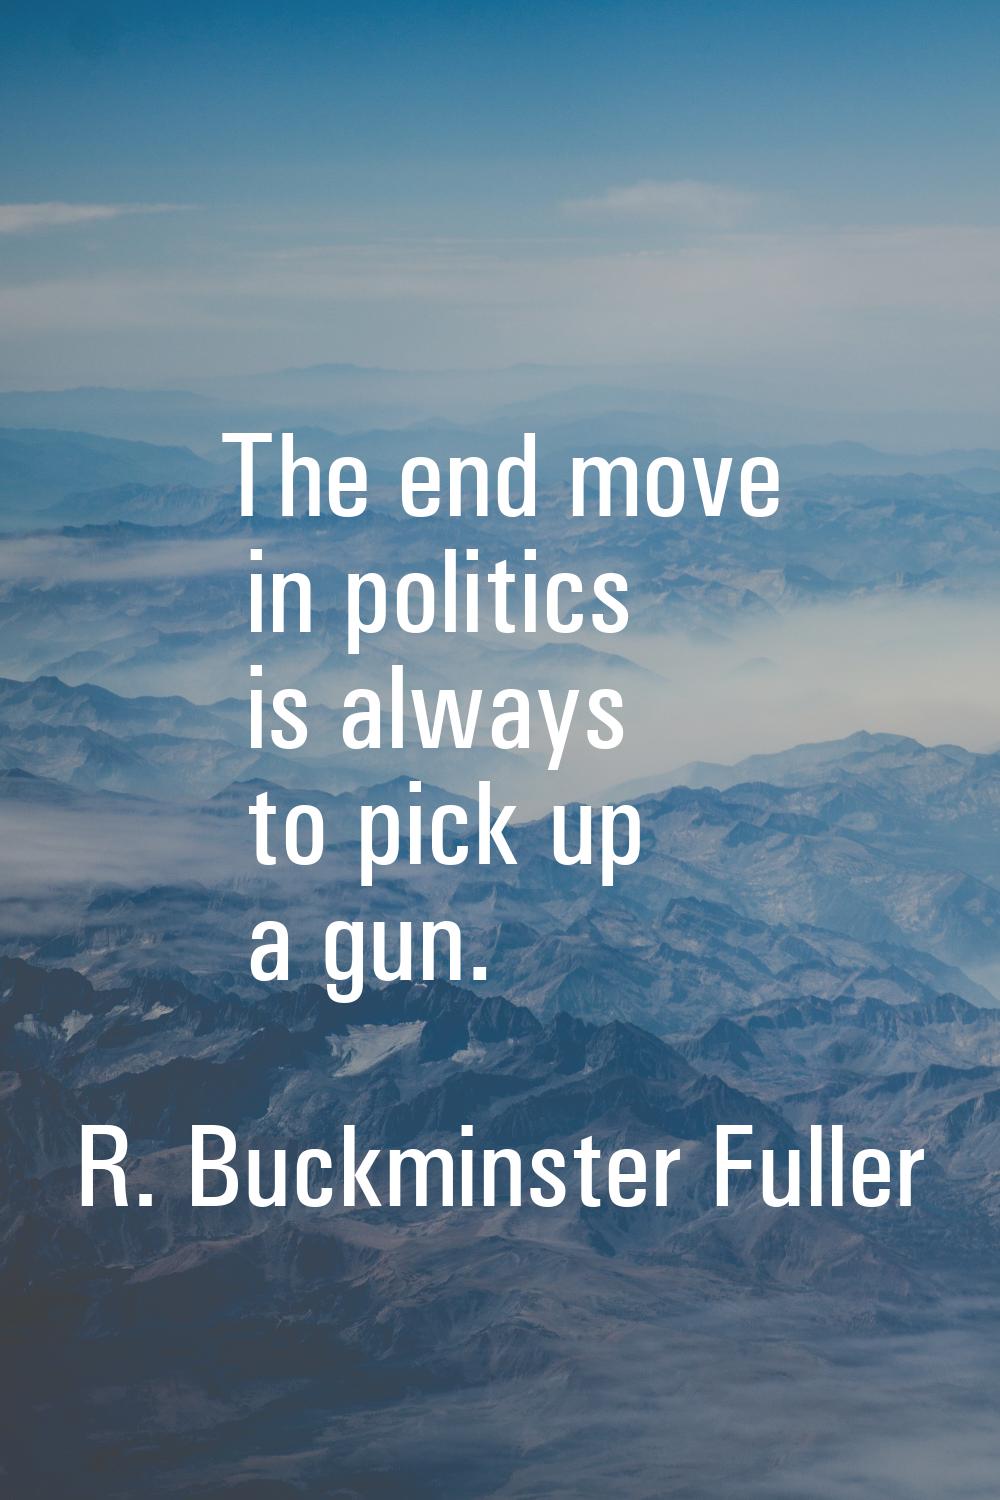 The end move in politics is always to pick up a gun.